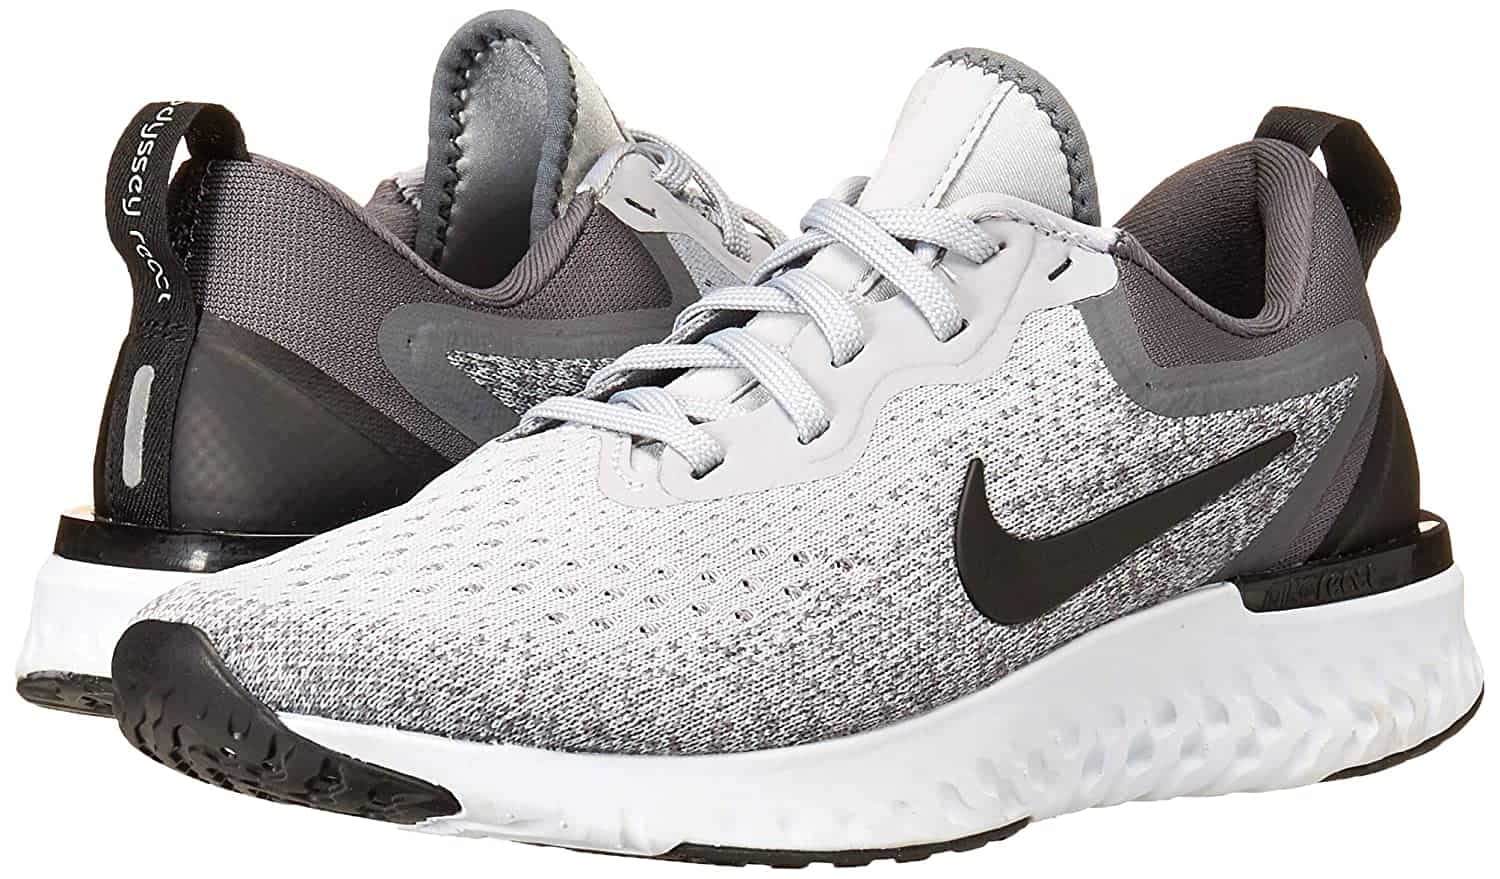 The Best Nike Shoes for women's | trends of 2020 in india | Shoe Brands